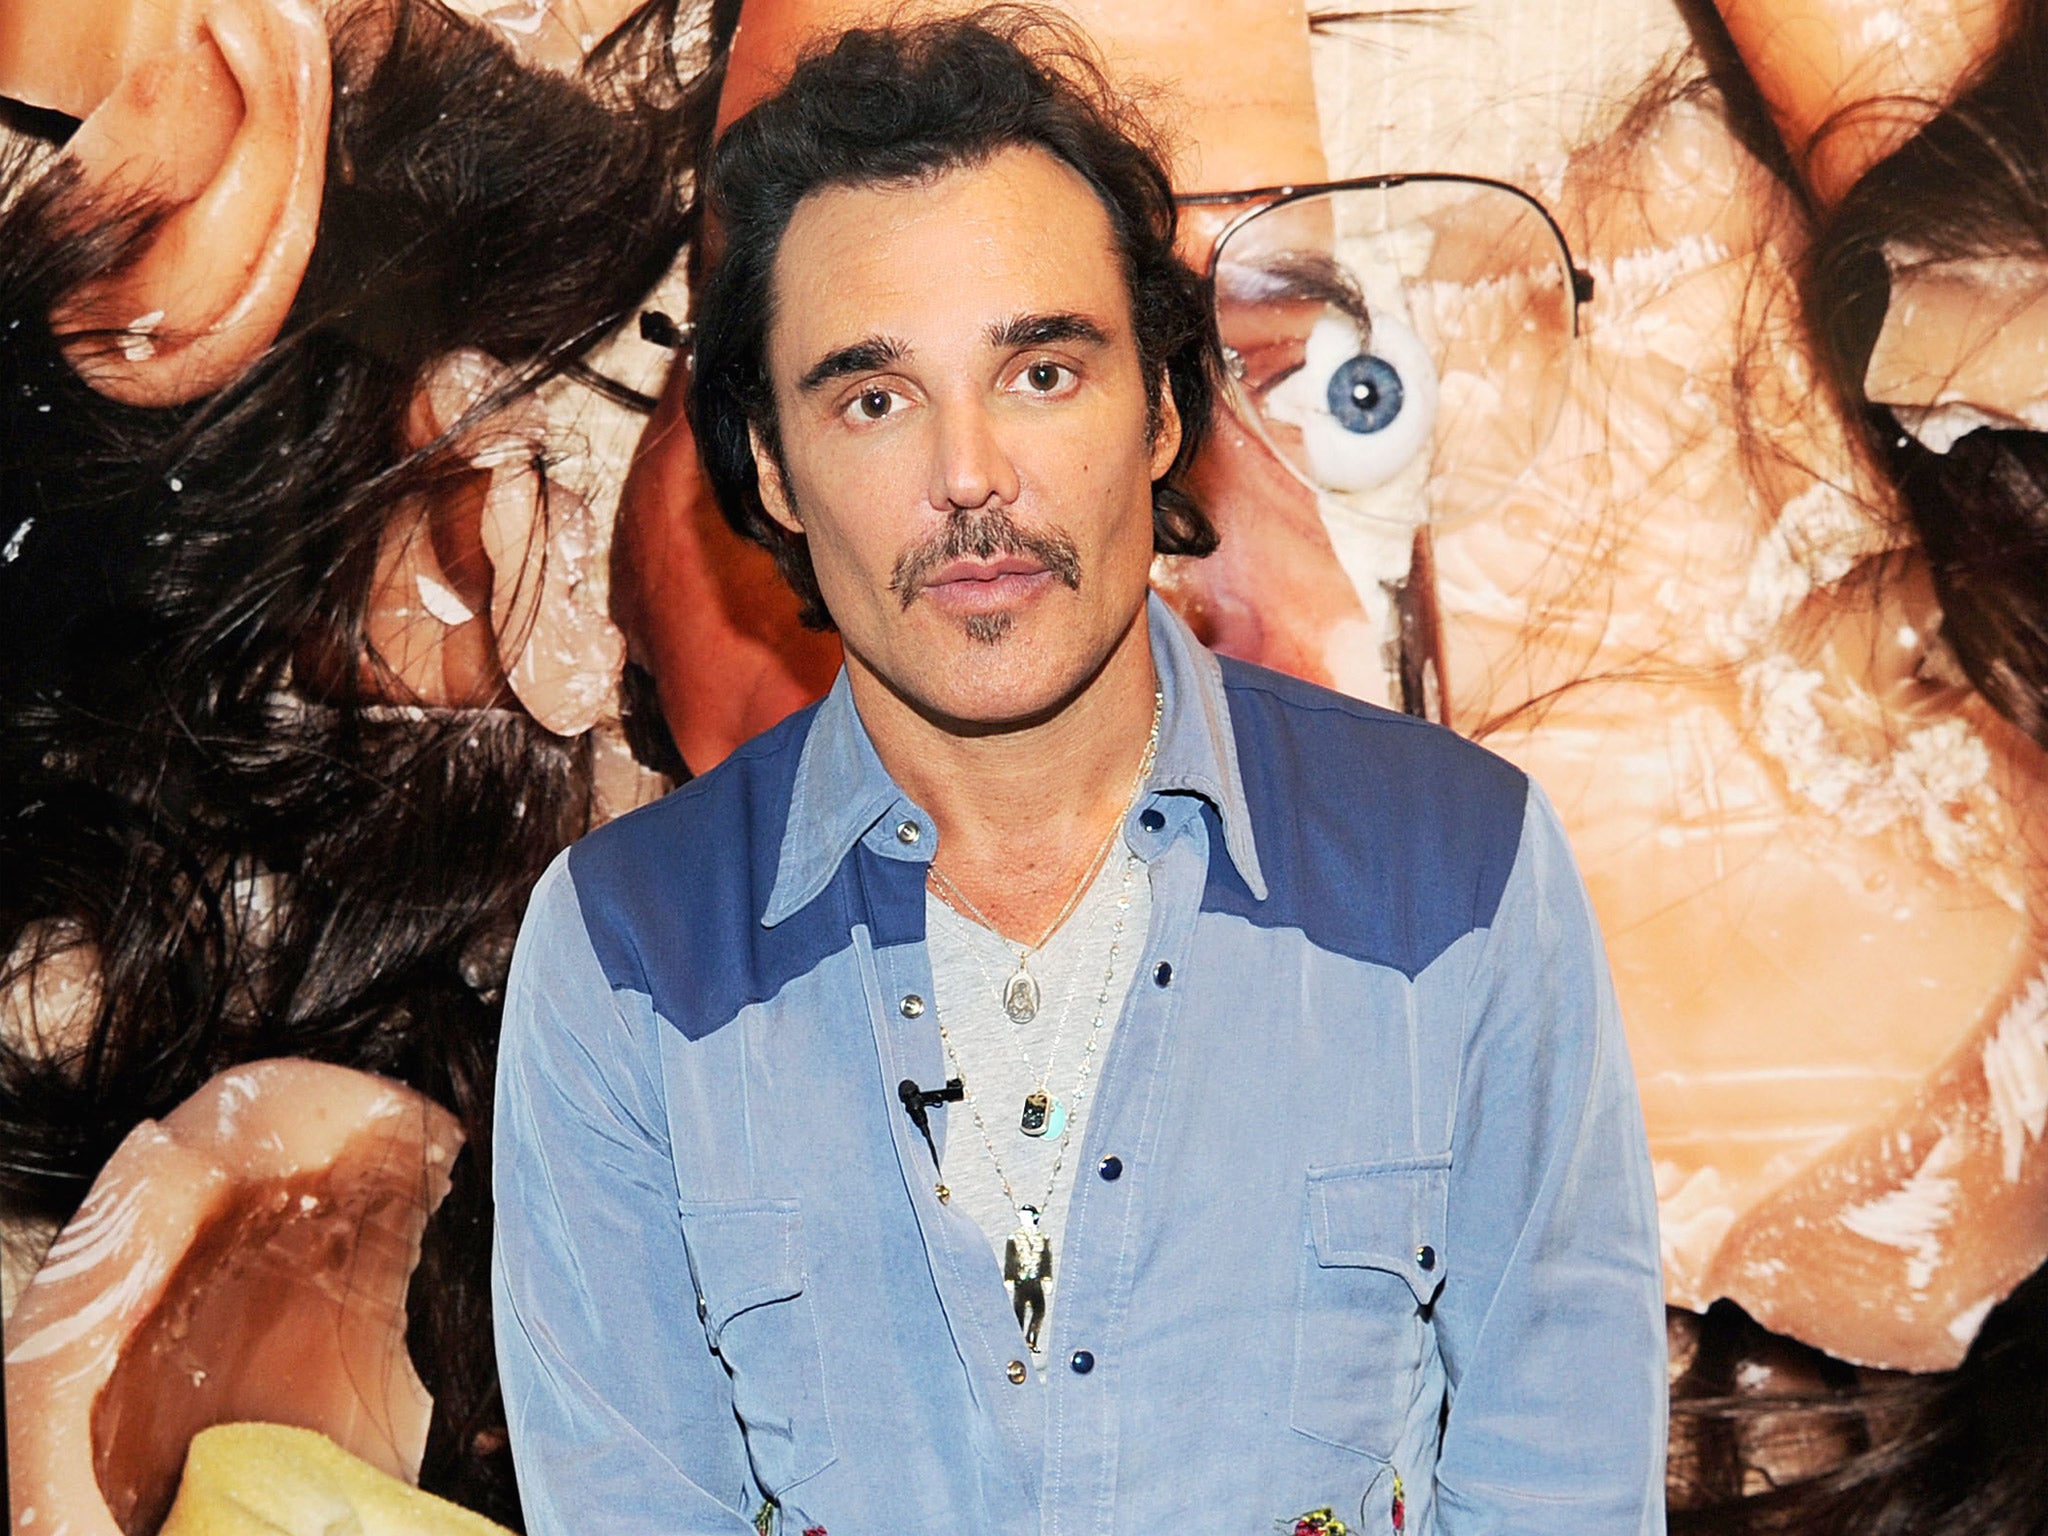 David LaChapelle at one of his exhibits in New York last year